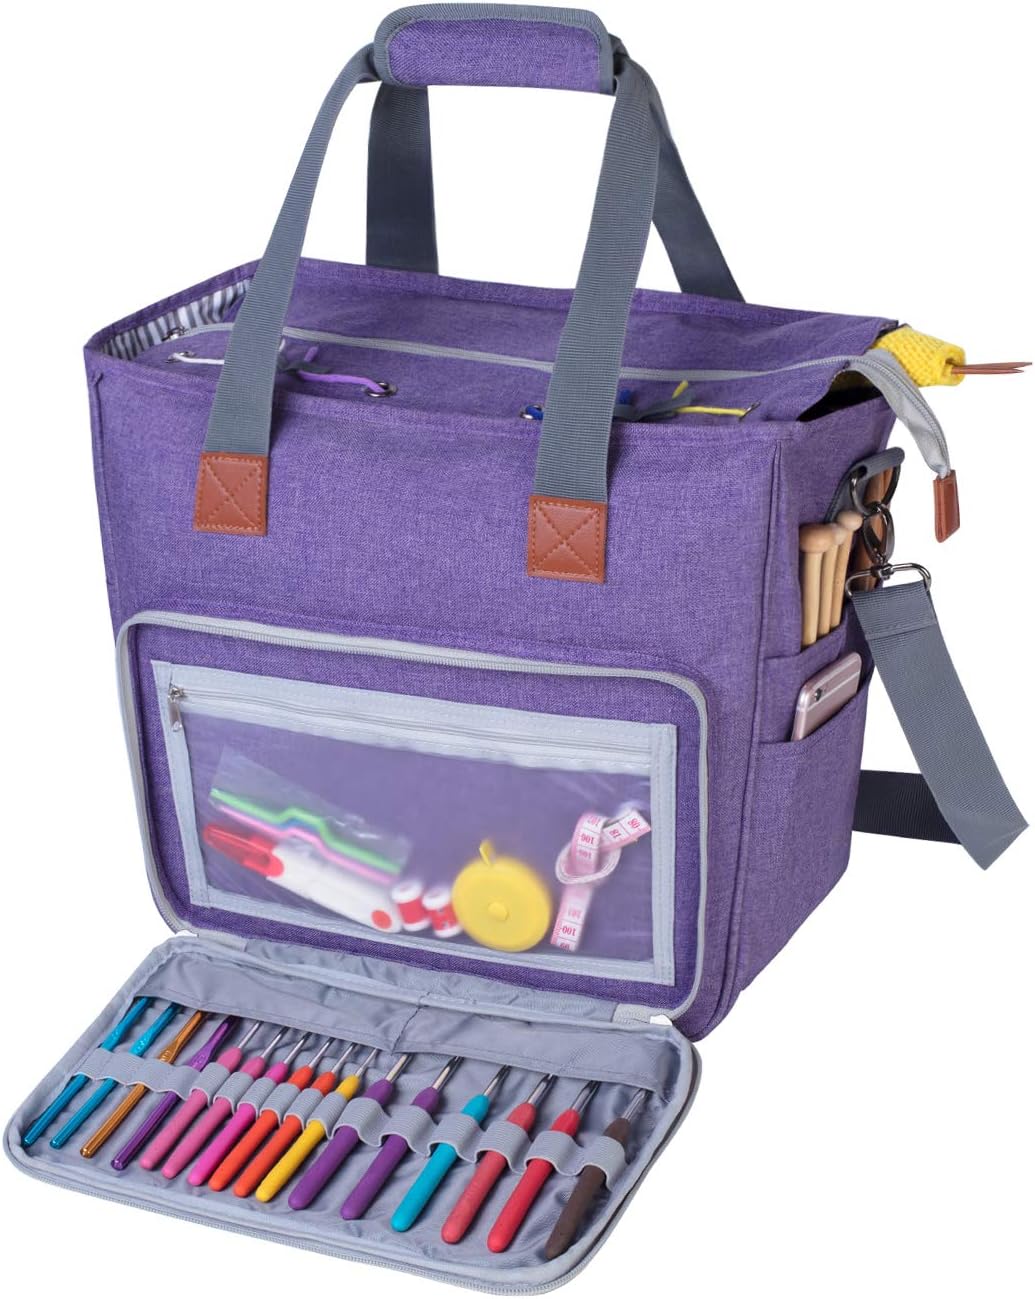 Knitting Tote BagYarn Storage Bag for Carrying Projects, Knitting Needles, Crochet Hooks and Other Accessories.